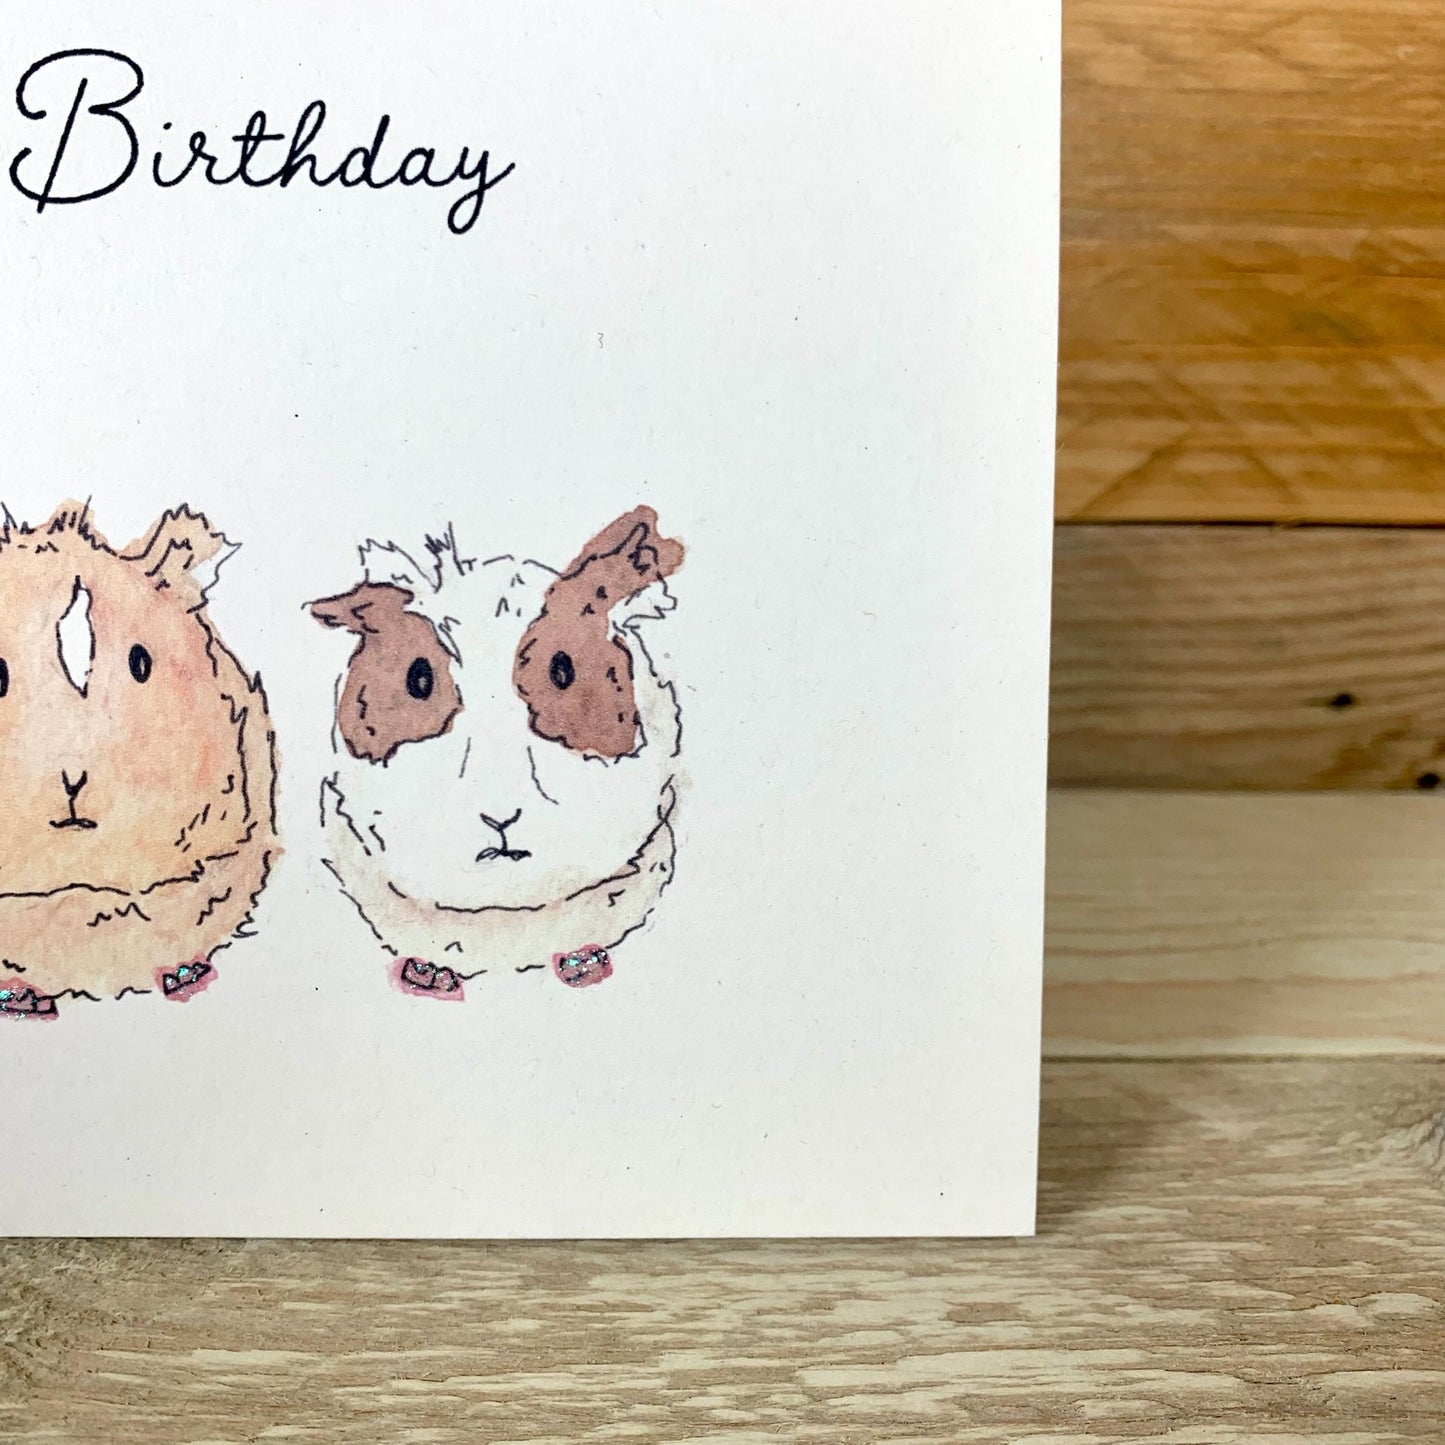 Tom, Dick and Harry, The Guinea Pigs Birthday Card - Arty Bee Designs 